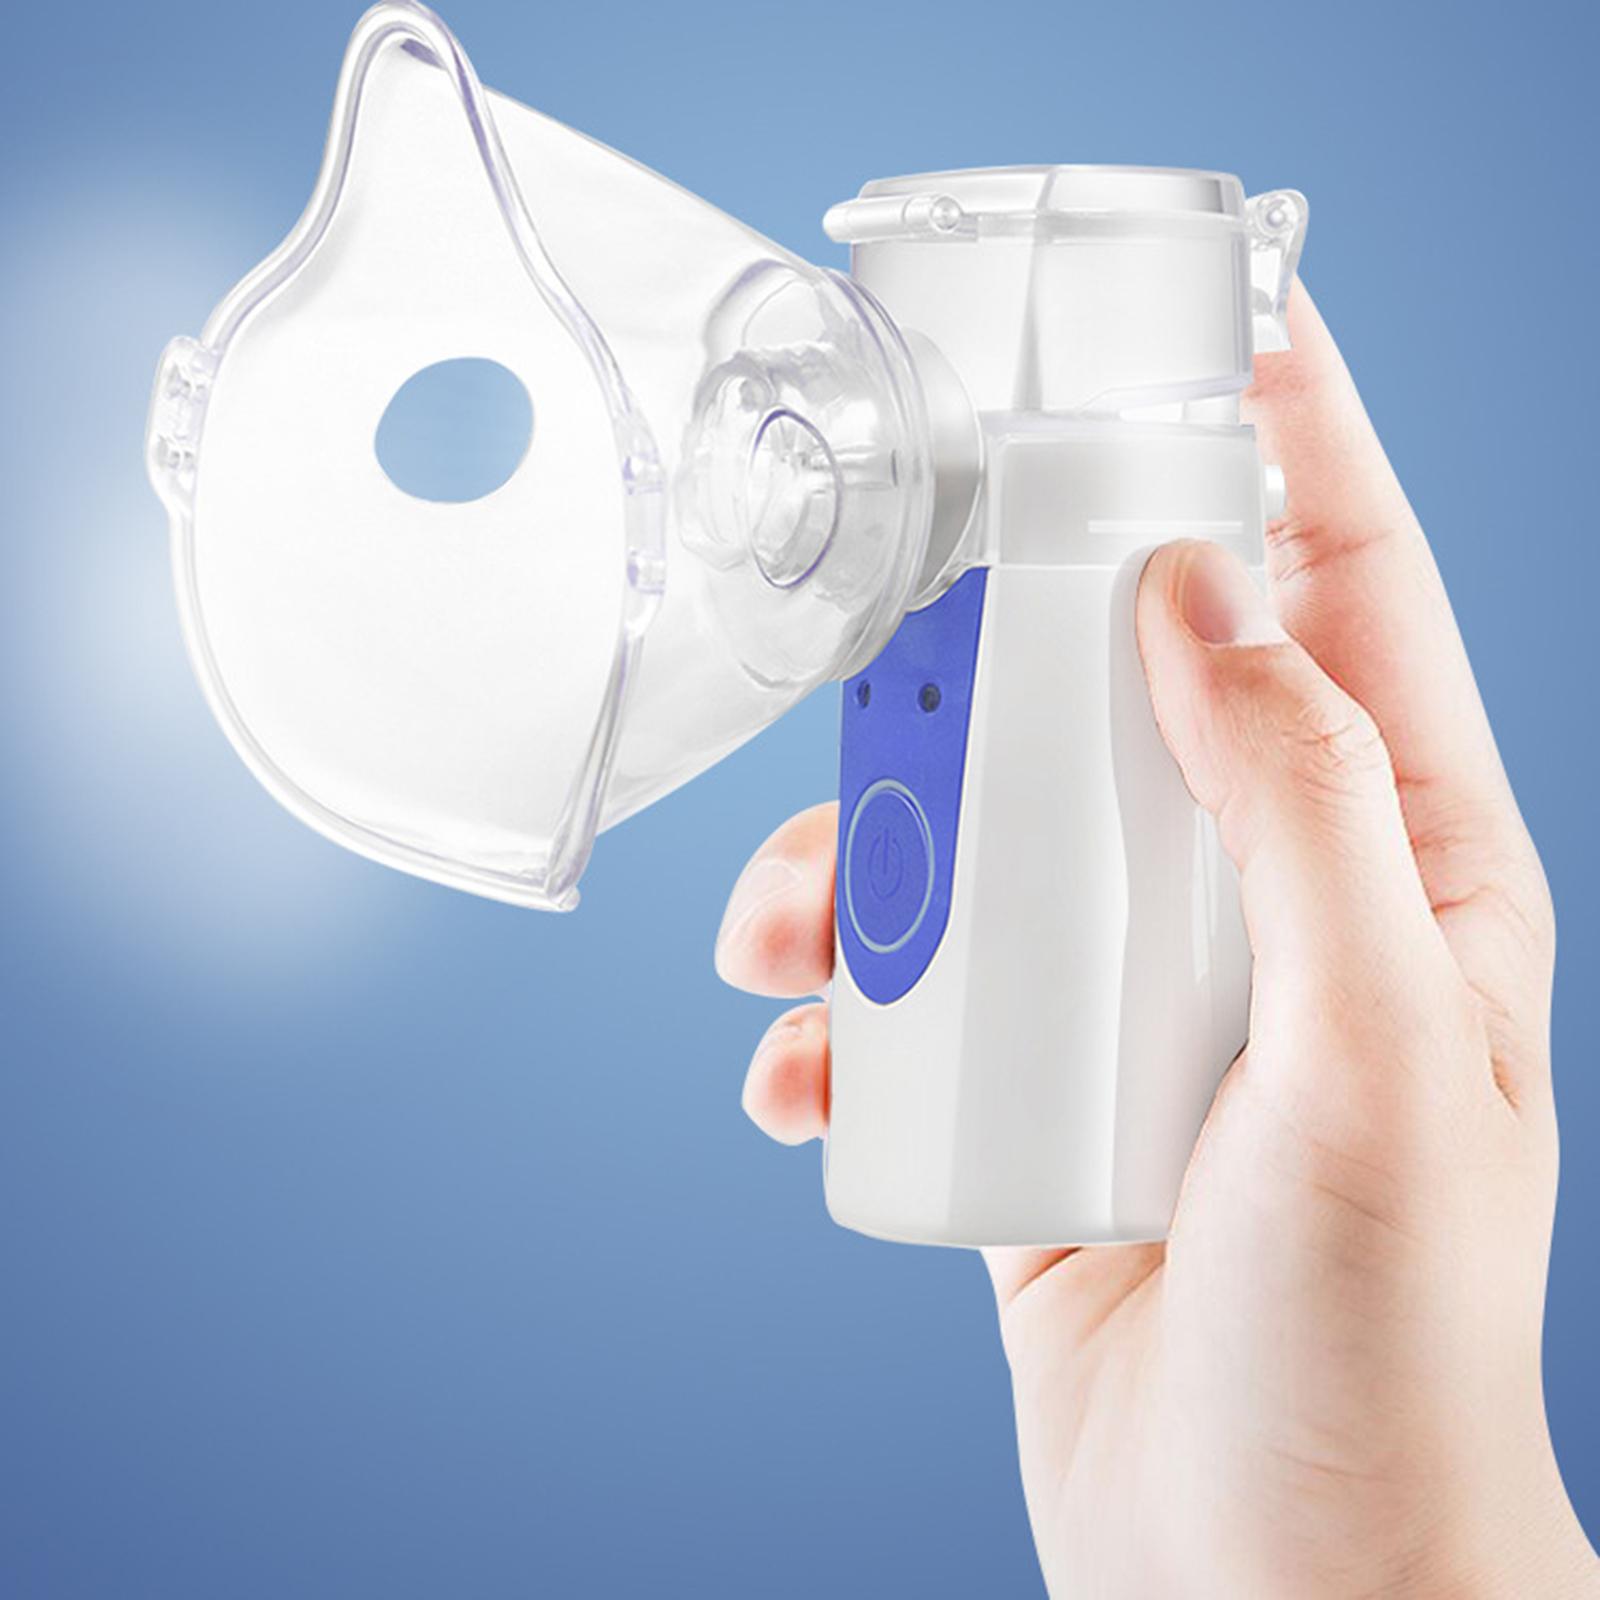 Handheld Nebulizer Personal Inhalers with Face Mask for Breathing Problems